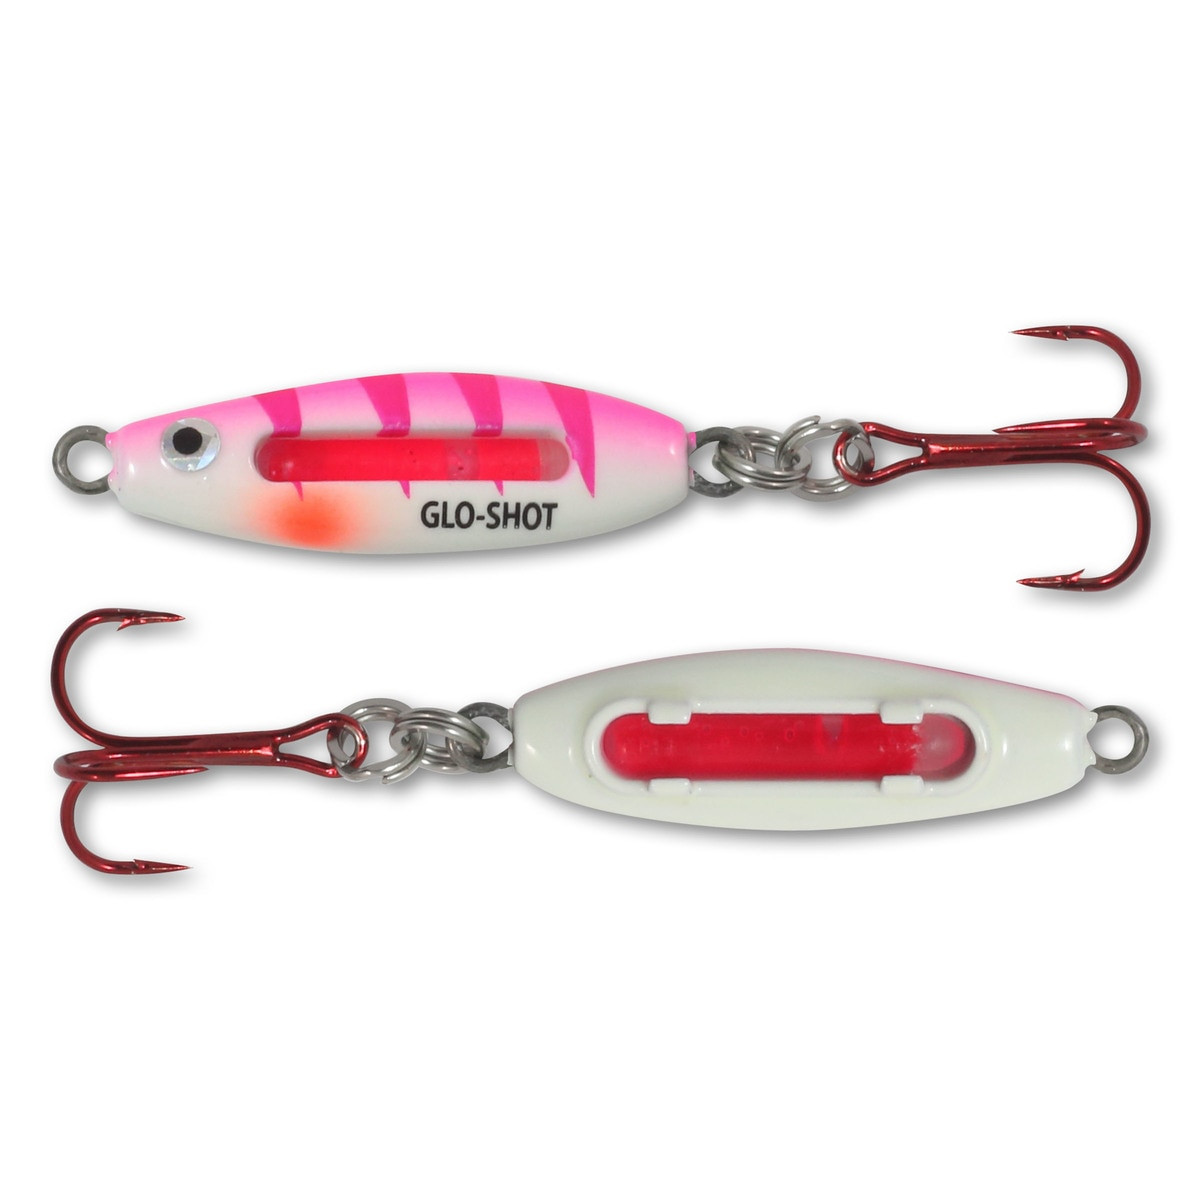 LUCKY LADY INNER Glow Fishing Lure New in Box $14.99 - PicClick